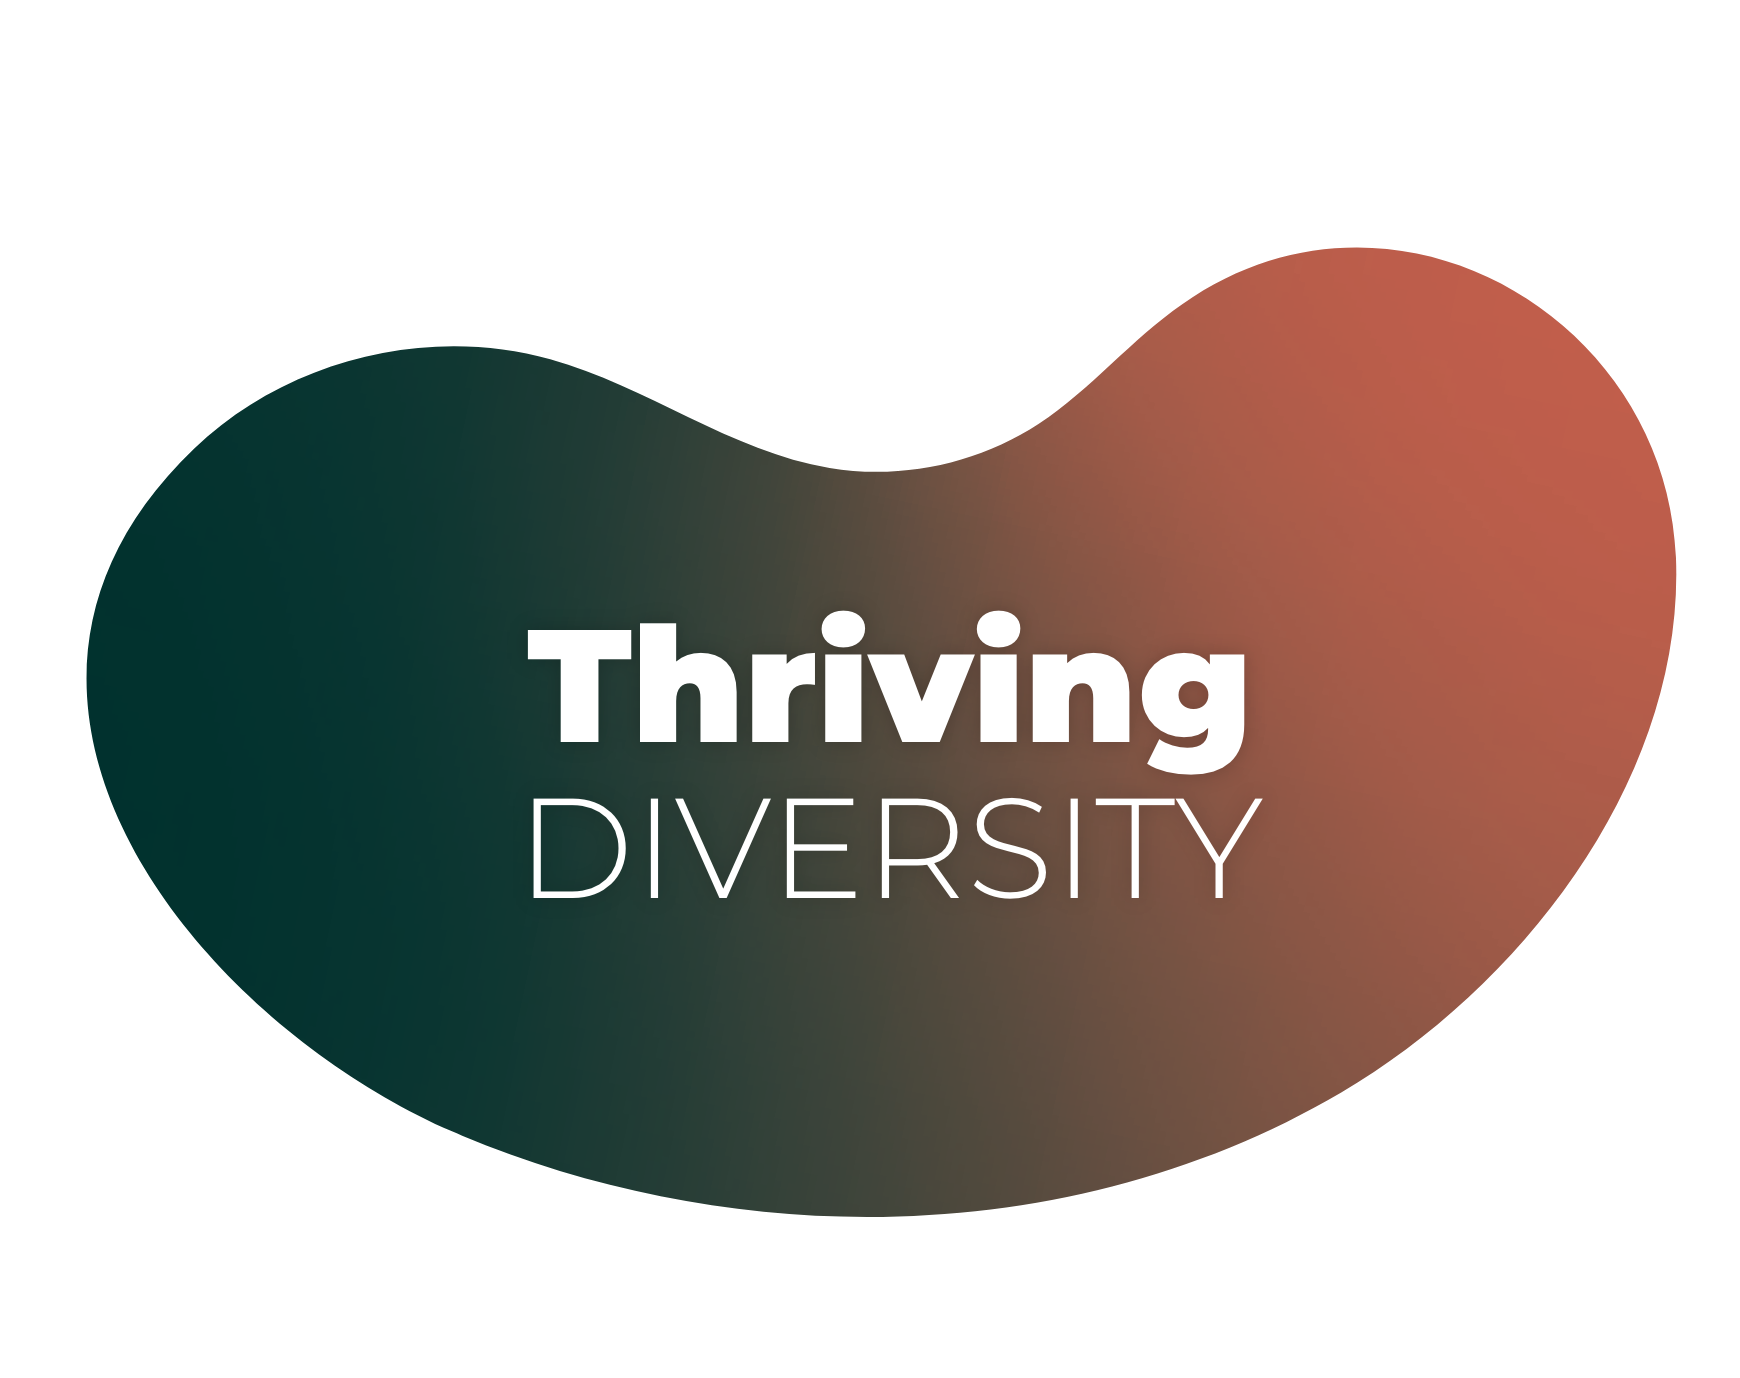 Thriving Diversity_In_Bubble@2x